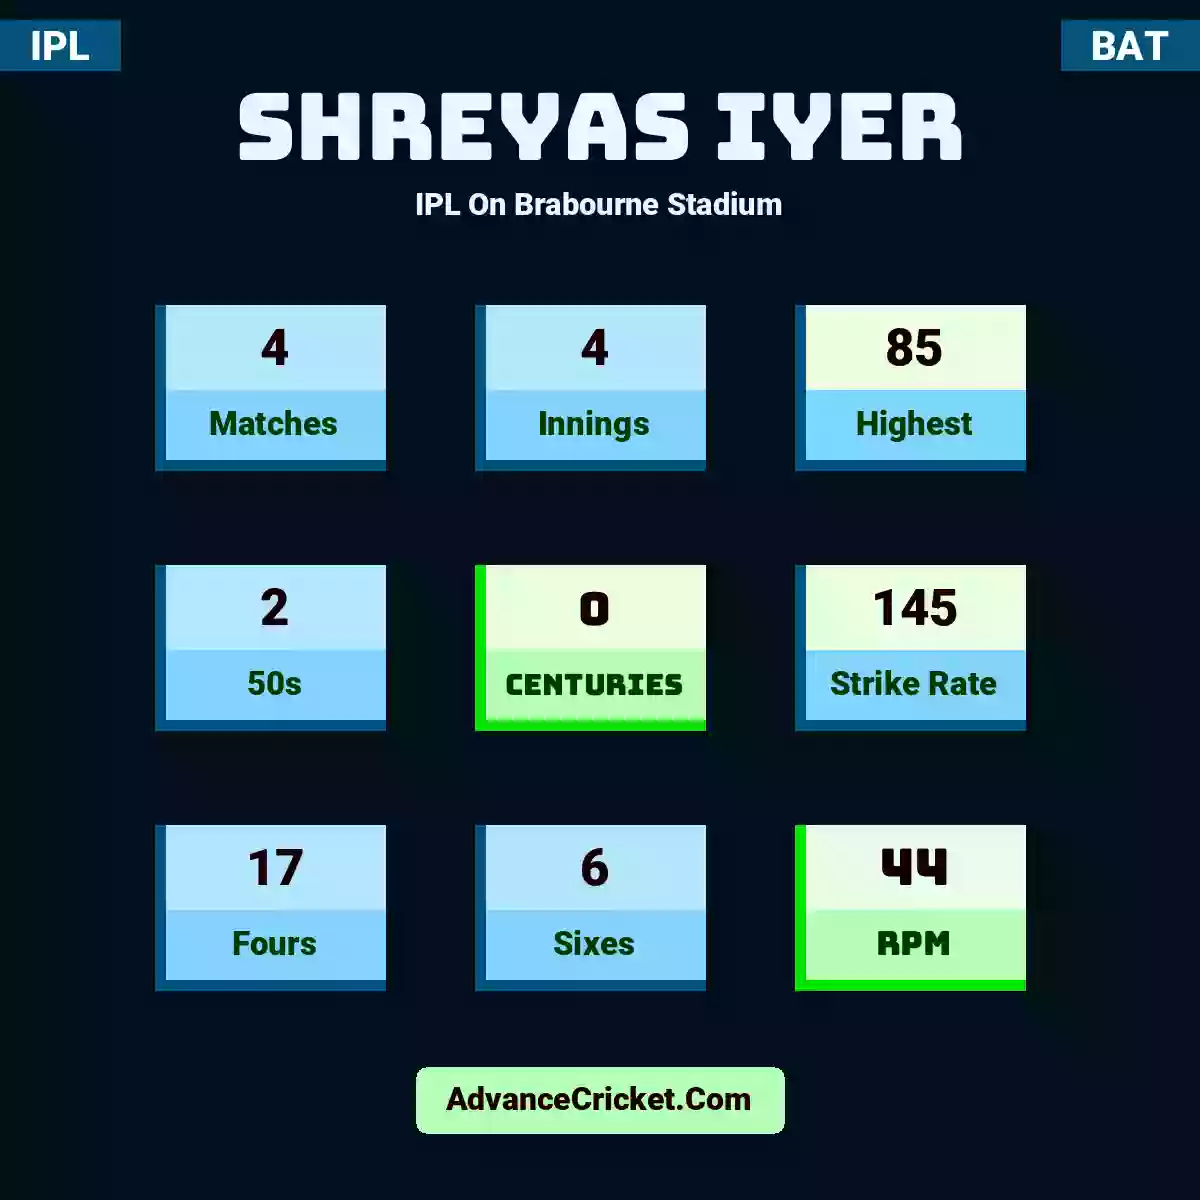 Shreyas Iyer IPL  On Brabourne Stadium, Shreyas Iyer played 4 matches, scored 85 runs as highest, 2 half-centuries, and 0 centuries, with a strike rate of 145. S.Iyer hit 17 fours and 6 sixes, with an RPM of 44.